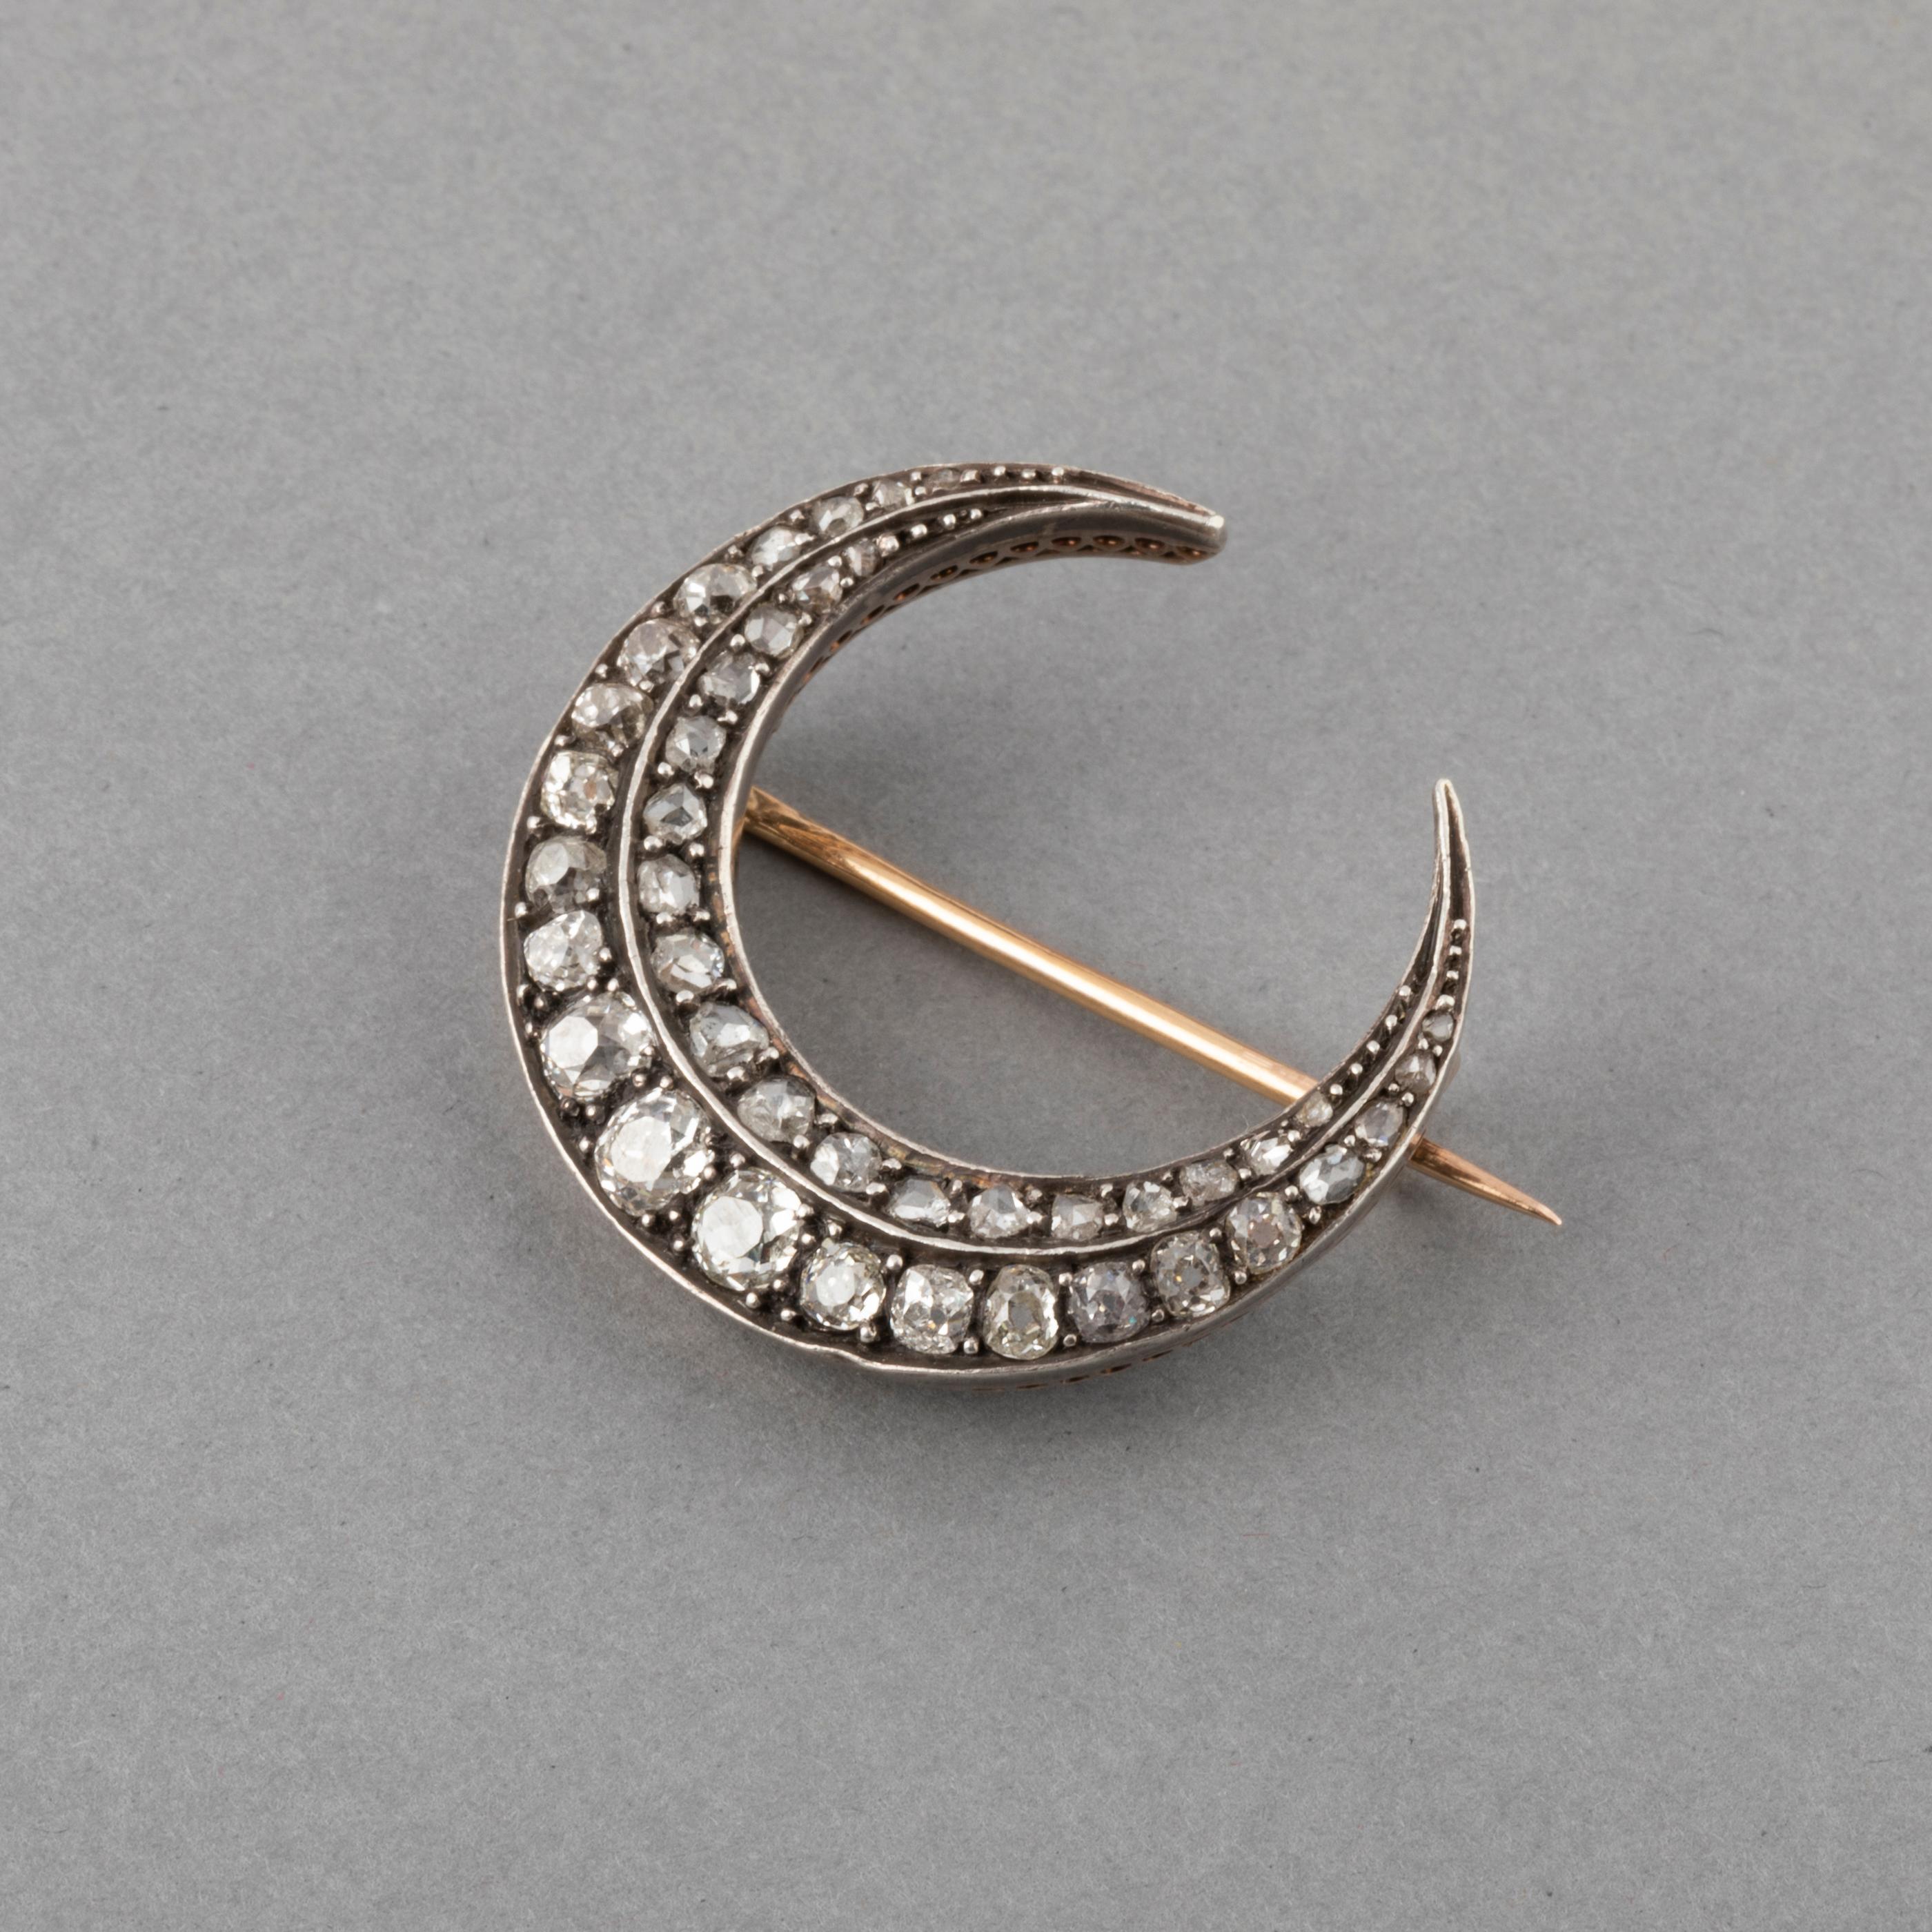 2 Carat Diamonds Antique French Crescent Brooch

Beautiful antique Crescent, made in France circa 1890. Made in rose gold 18k and silver. Mark gold: the owl. Mark for silver: the swan. 
The diamonds weights 2 carats at least. Old European cut and